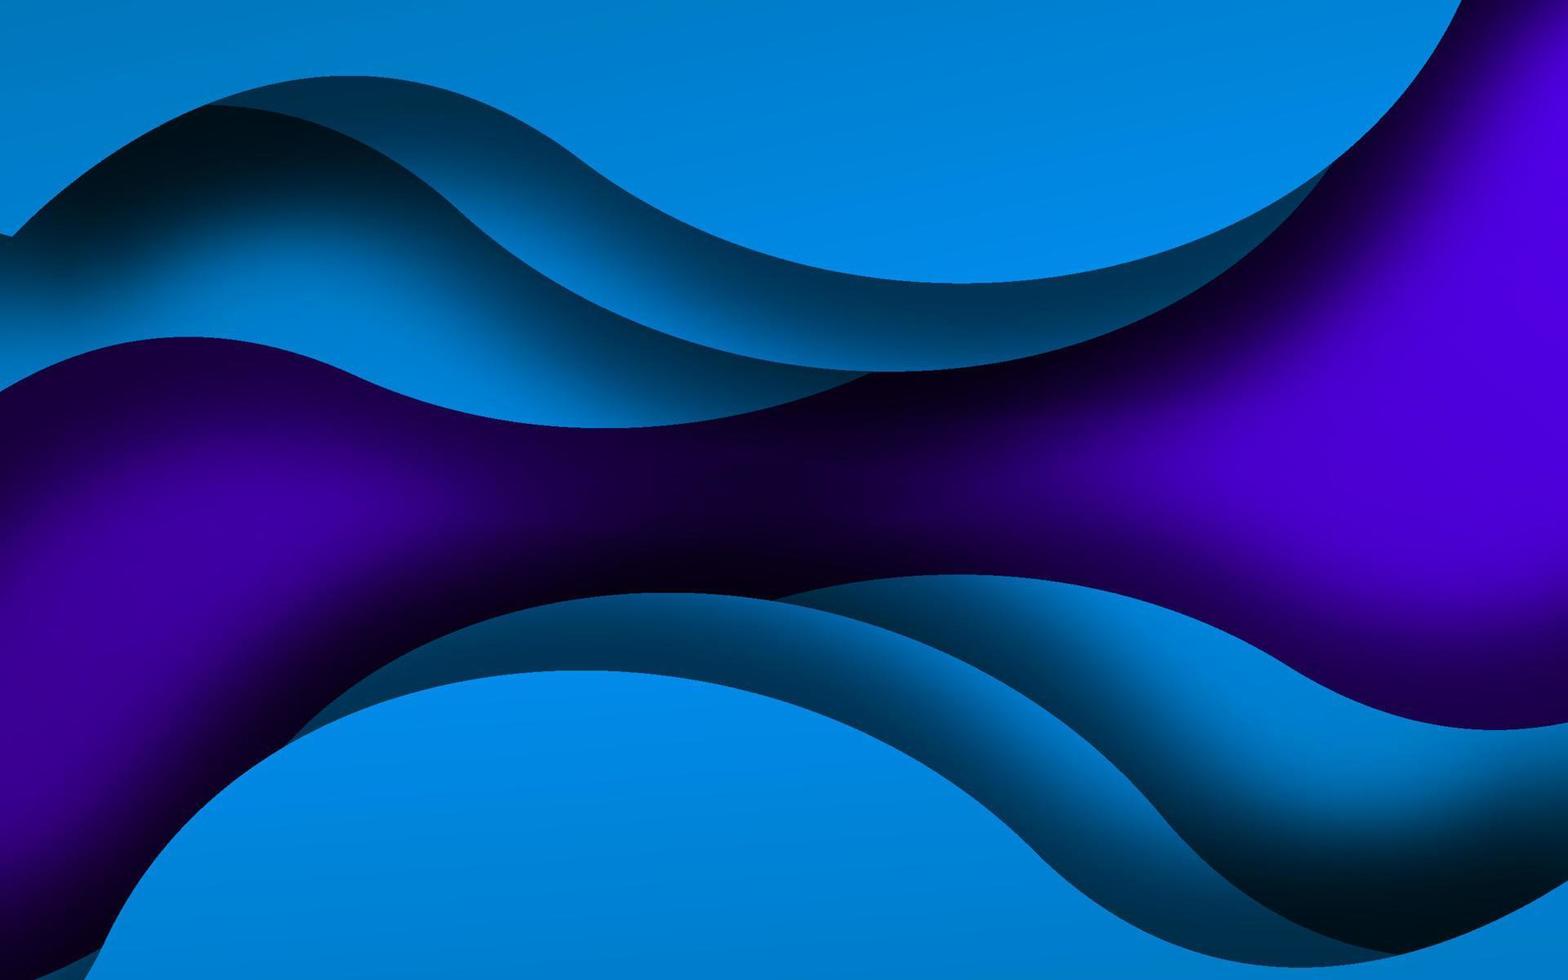 Abstract navy blue wave shape background vector